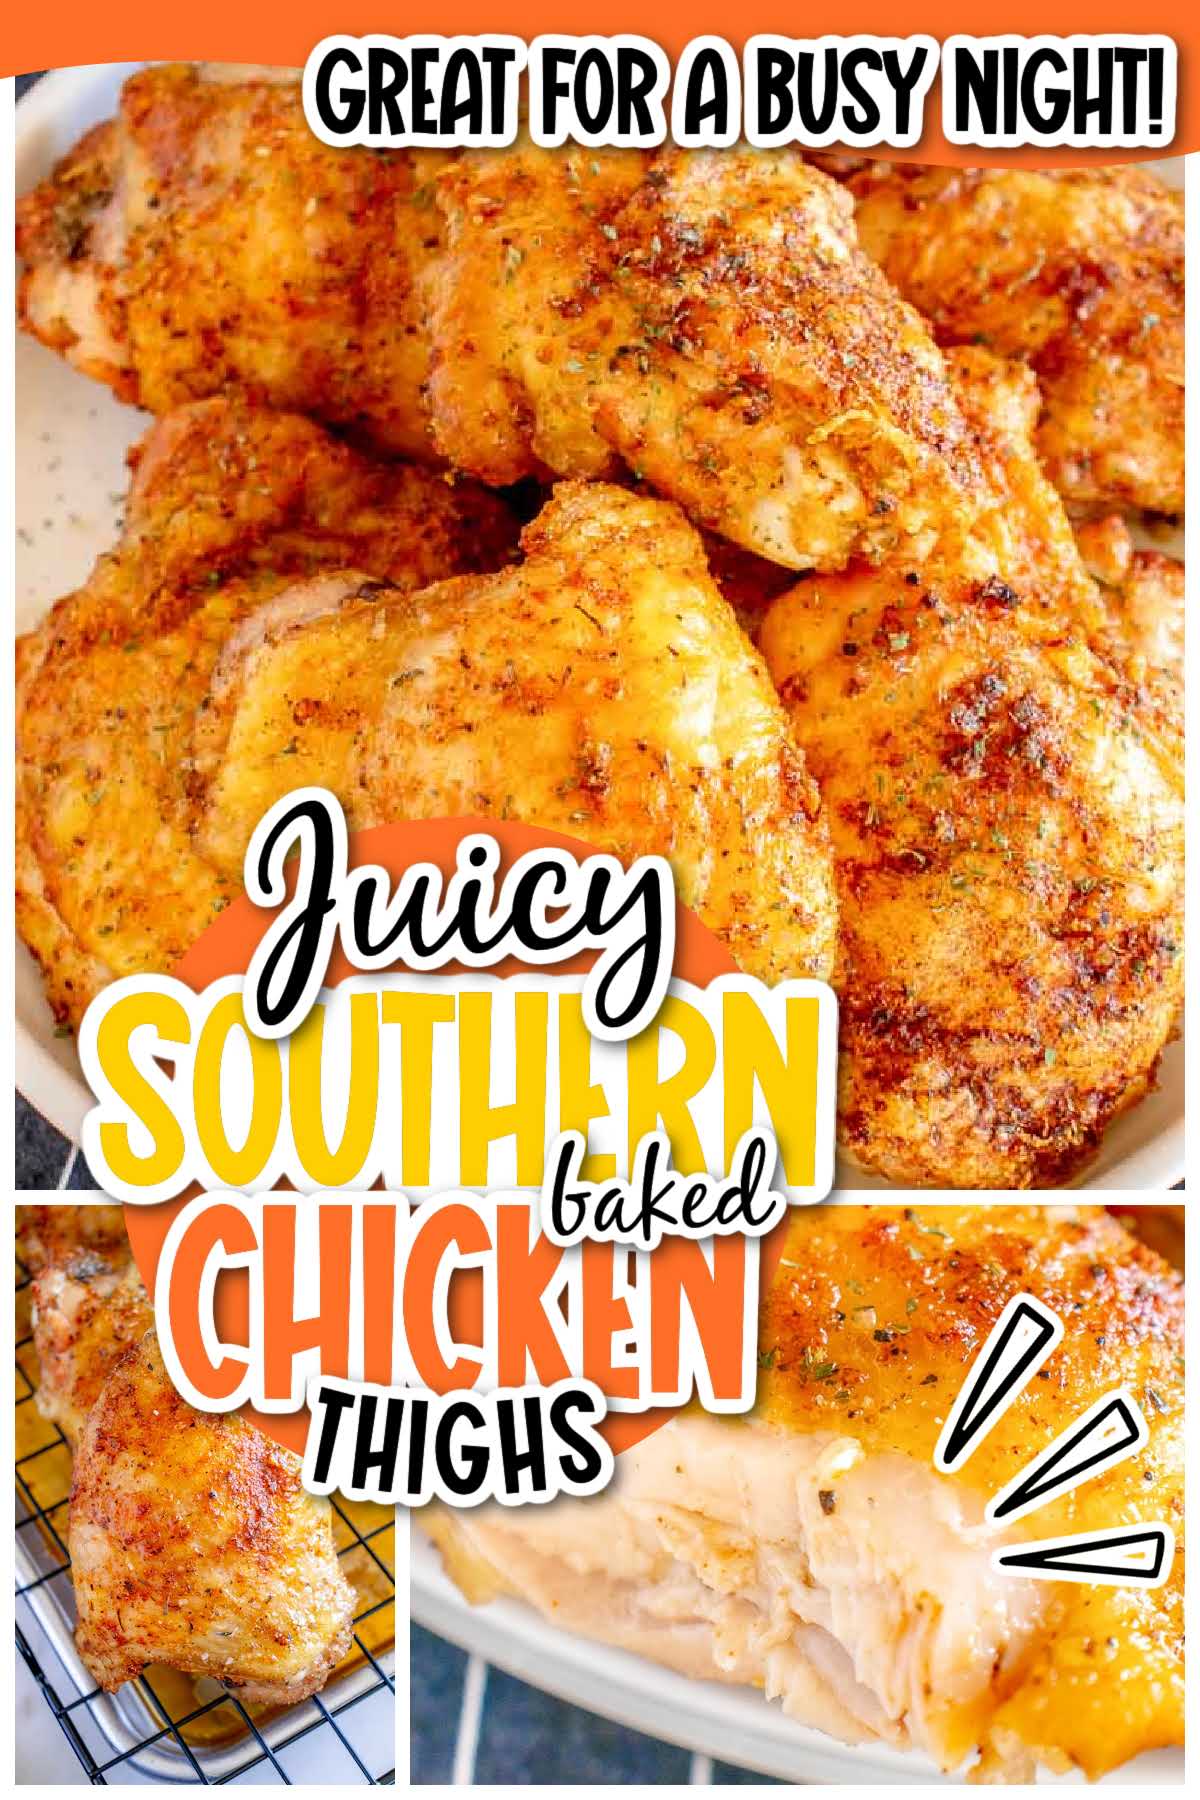 Three image collage showing various views of Southern baked chicken thighs with text overlay.